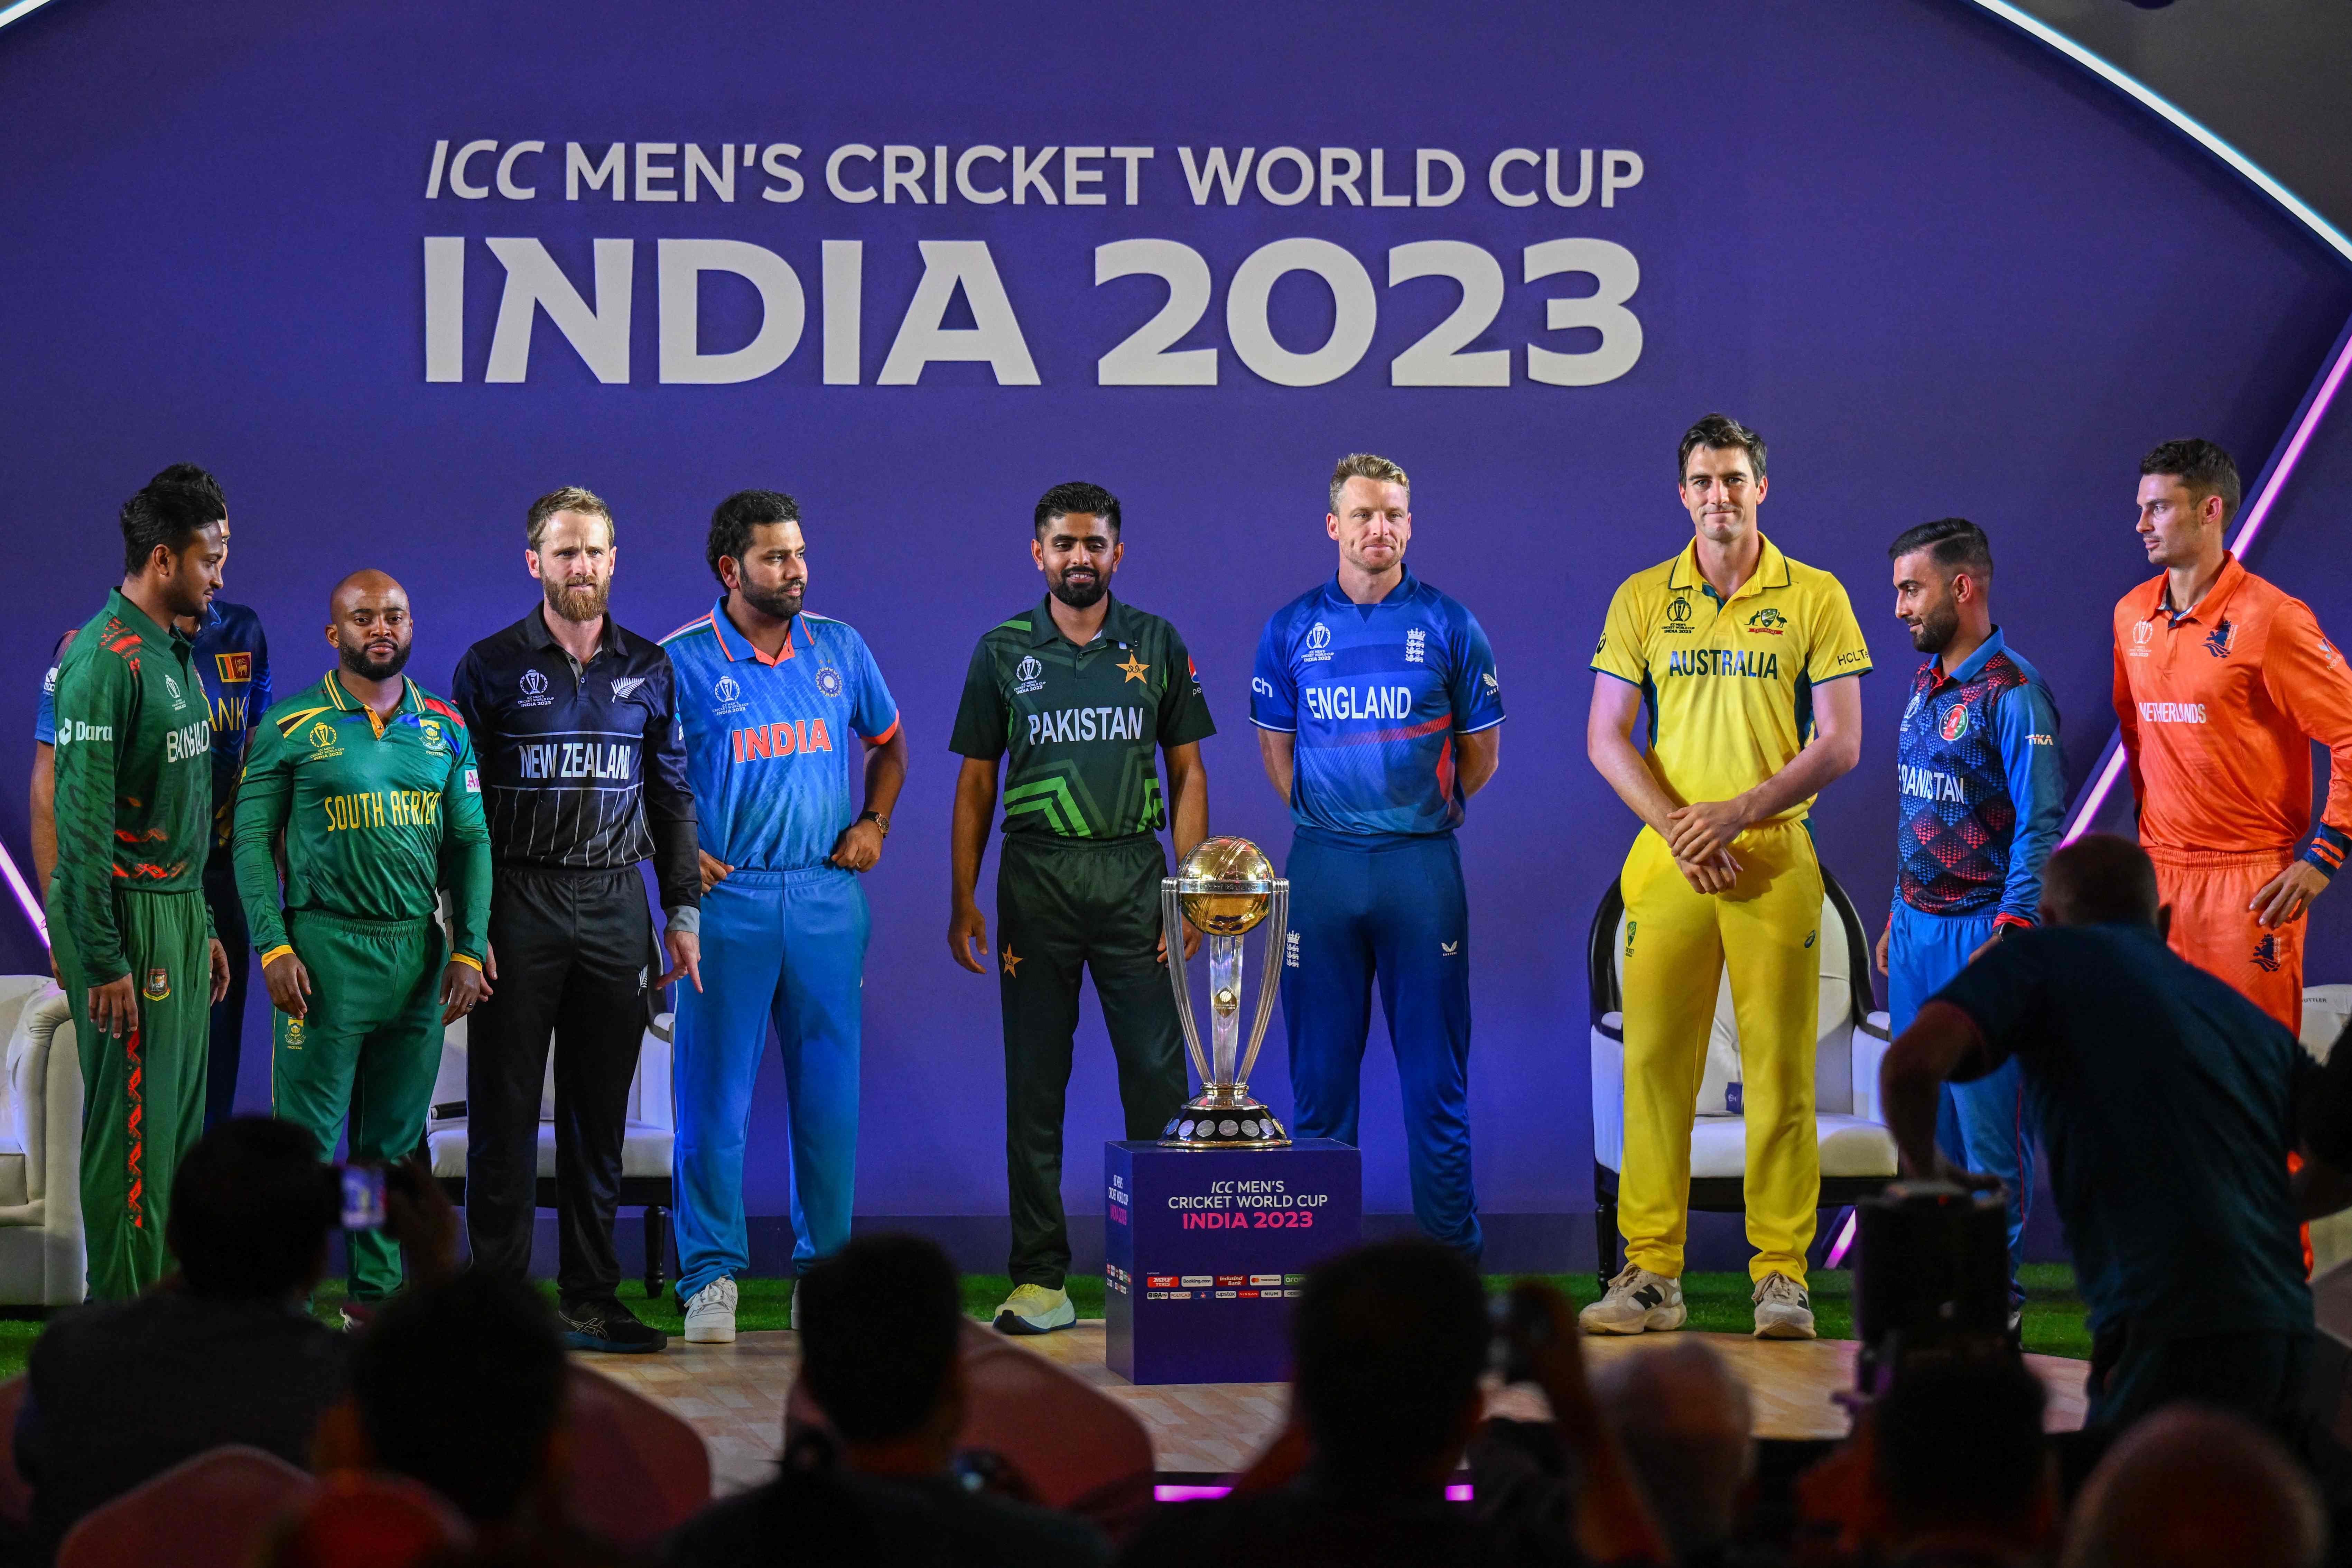 icc t20 live match video online free